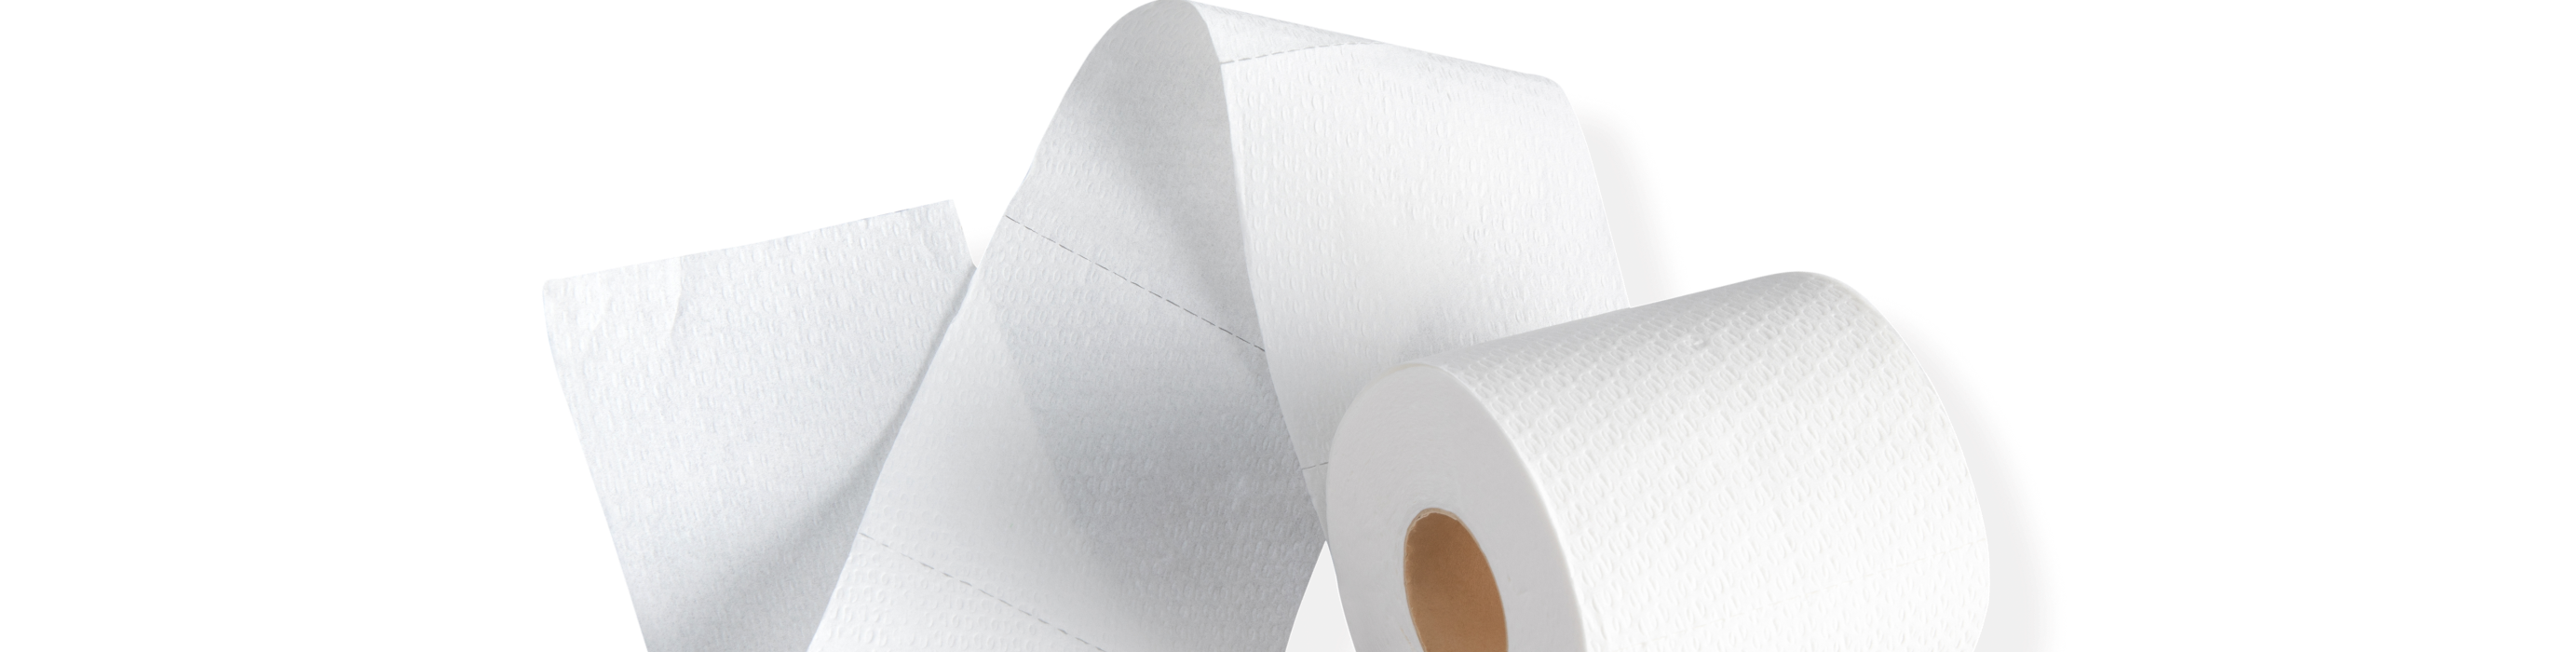 Reel Premium Recycled Paper Towels- 12 Rolls, 2-Ply Egypt